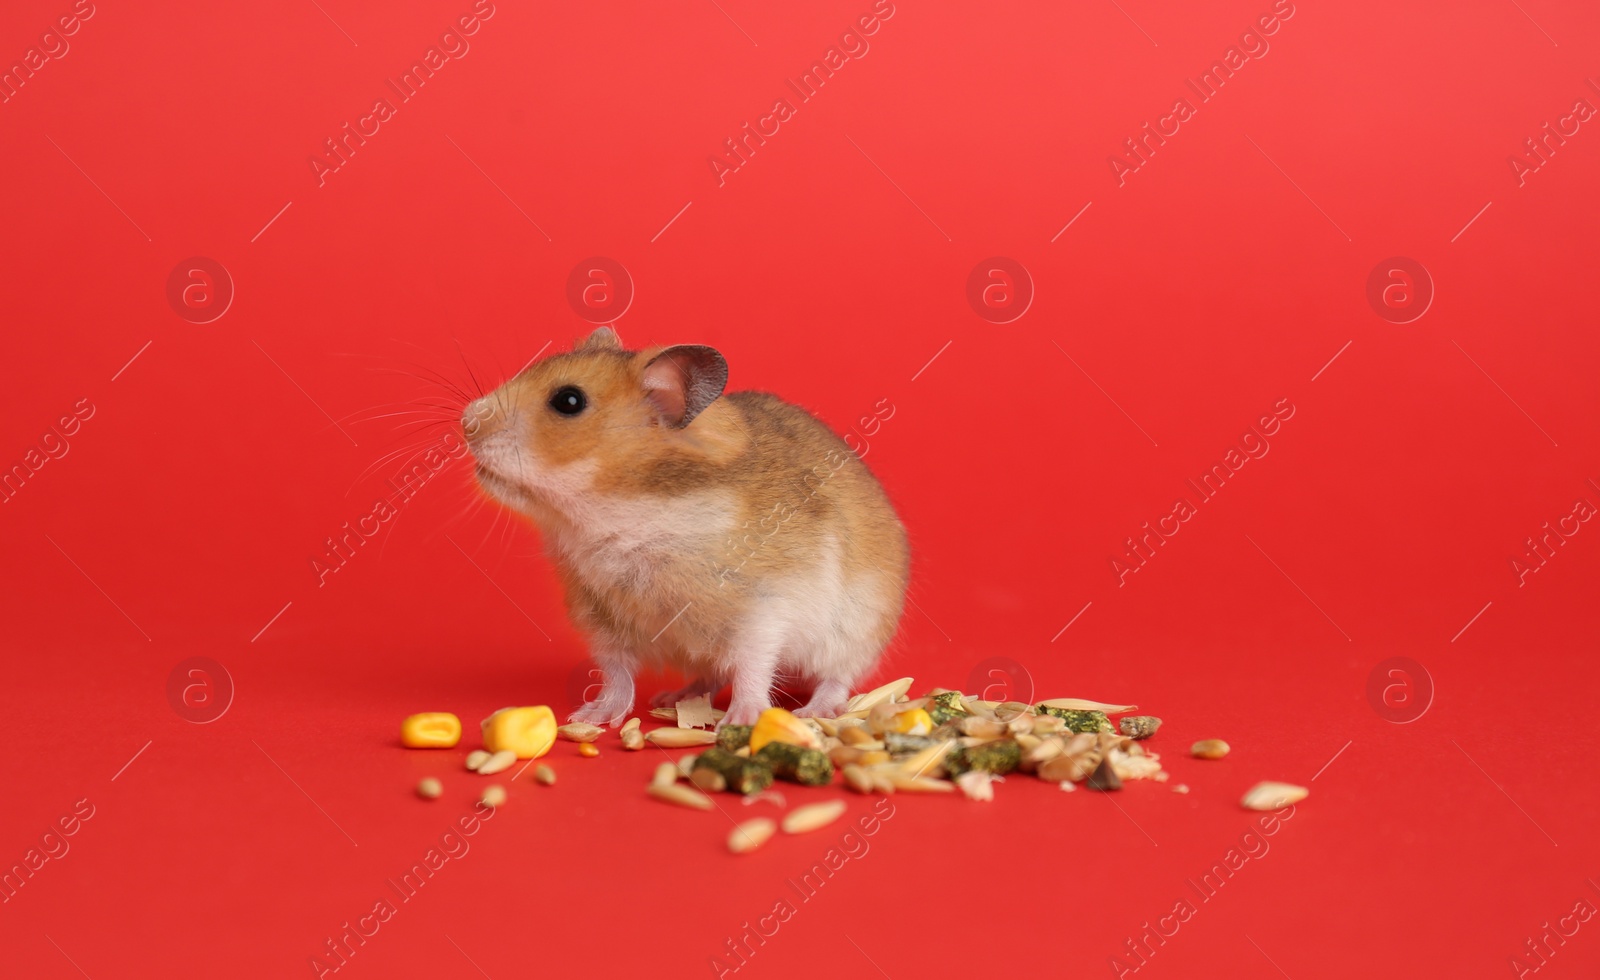 Photo of Cute little hamster eating on red background